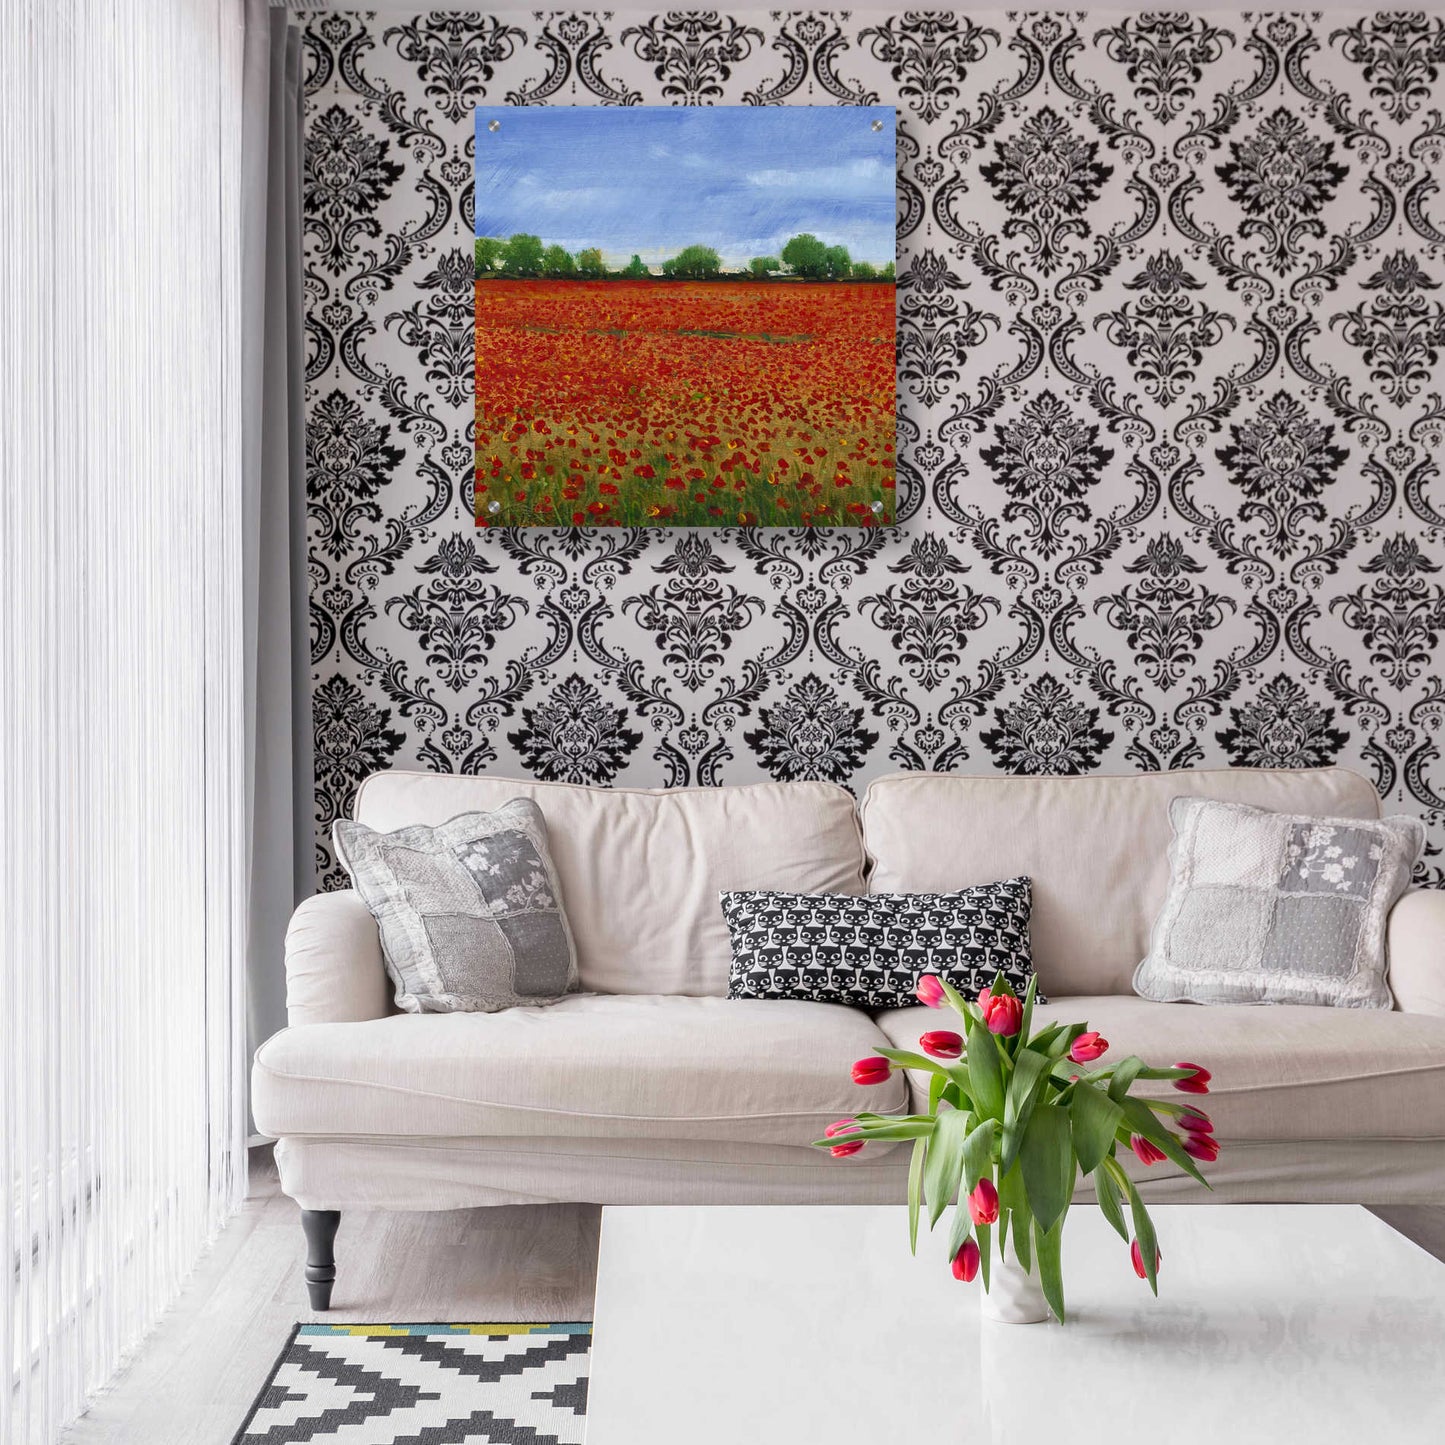 Epic Art 'Field of Poppies I' by Tim O'Toole, Acrylic Glass Wall Art,24x24